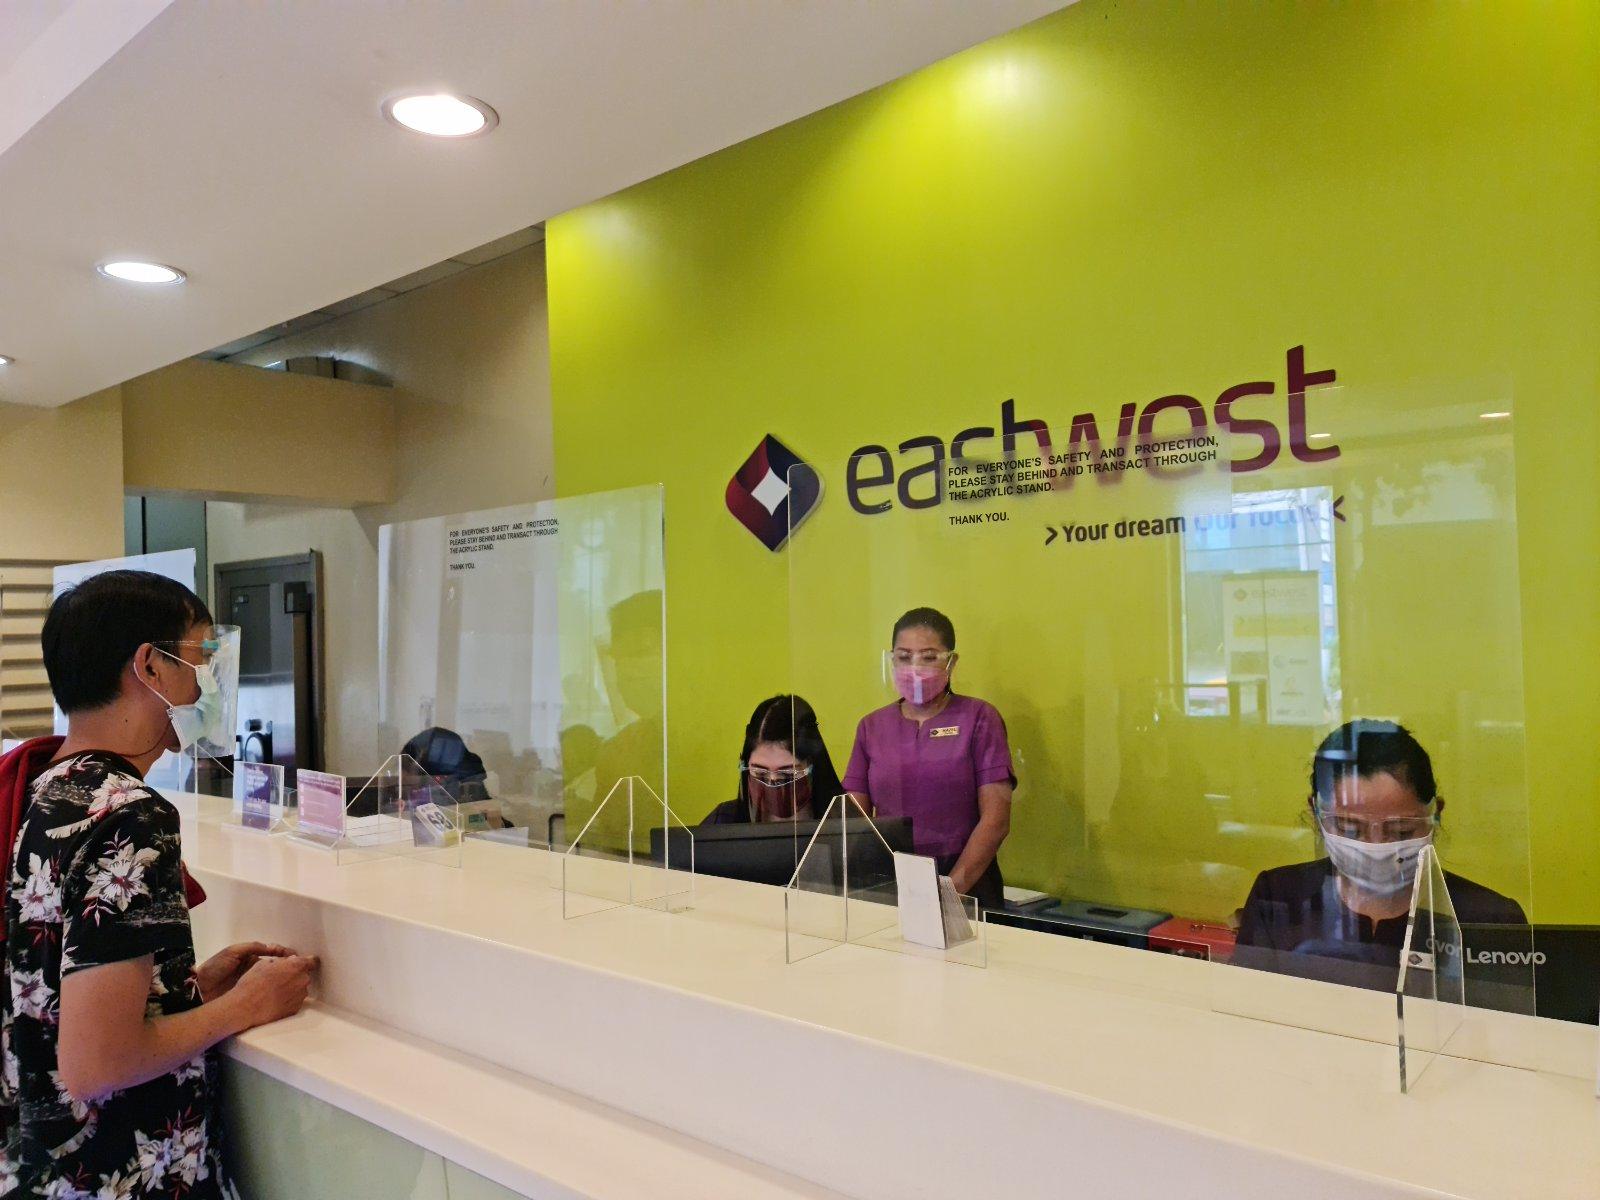 A total of 924 employees and third-party hires from EastWest’s stores in Cebu and in nearby areas are set to be vaccinated in the Visayas leg of FilVax.